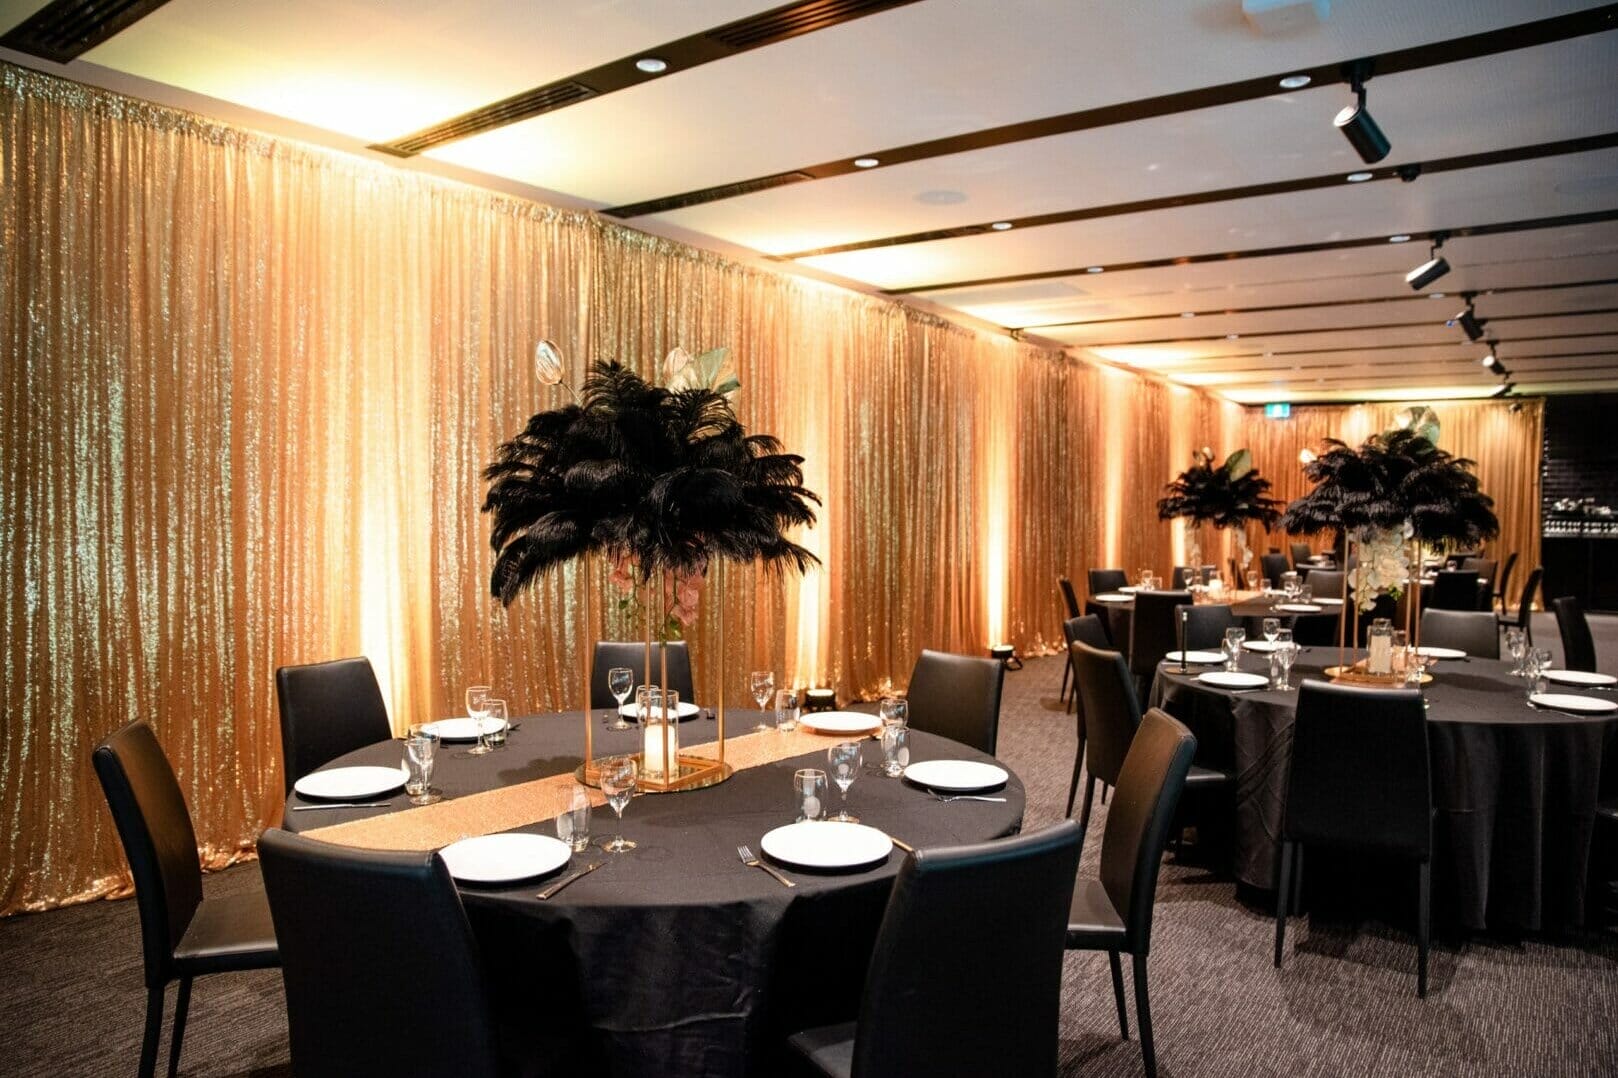 Gold sequin drape, black feather centerpieces, and table setups at puffing bill event space setup